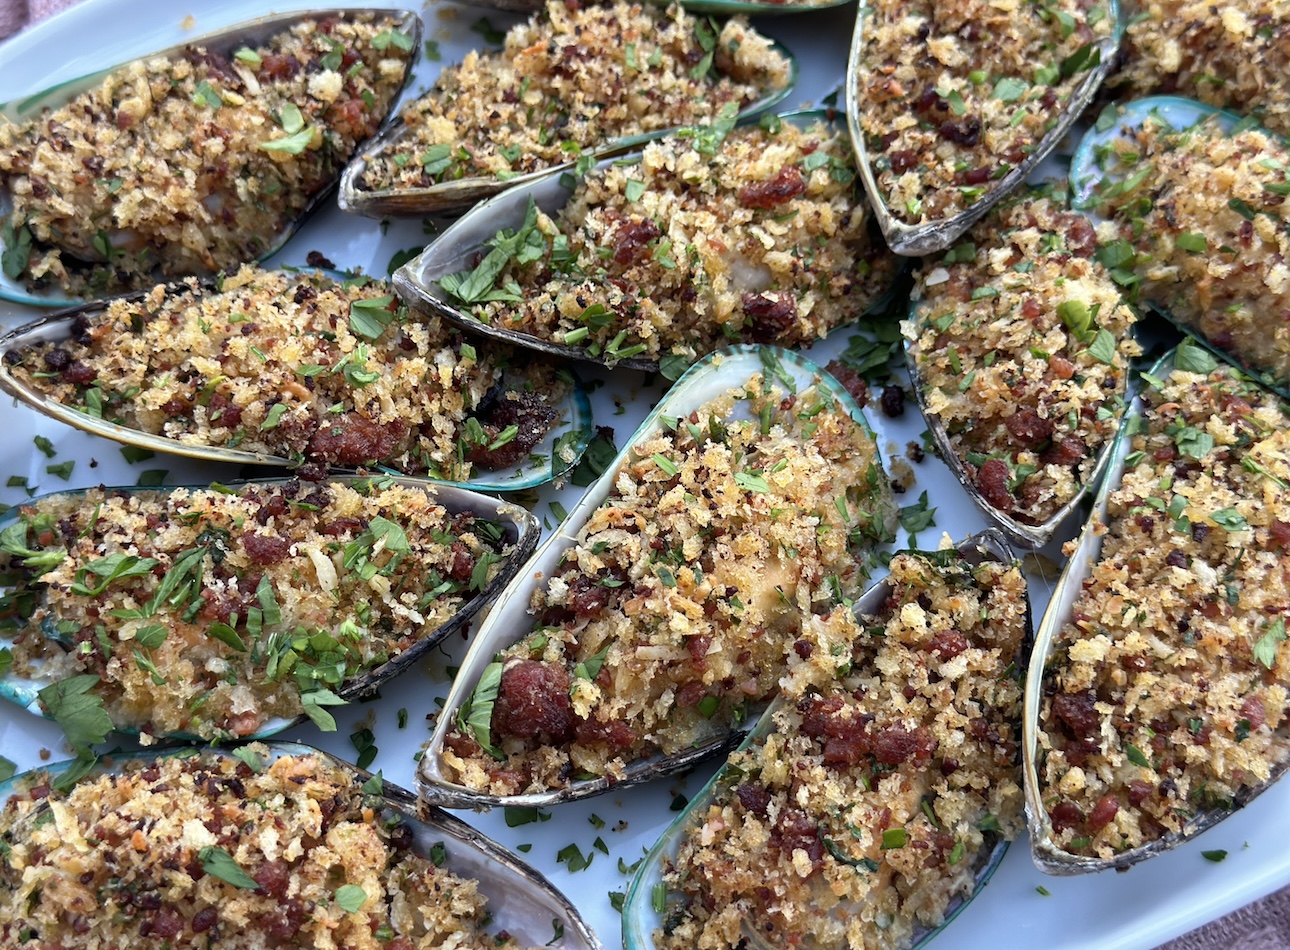 Mussels with Chorizo Crumbs